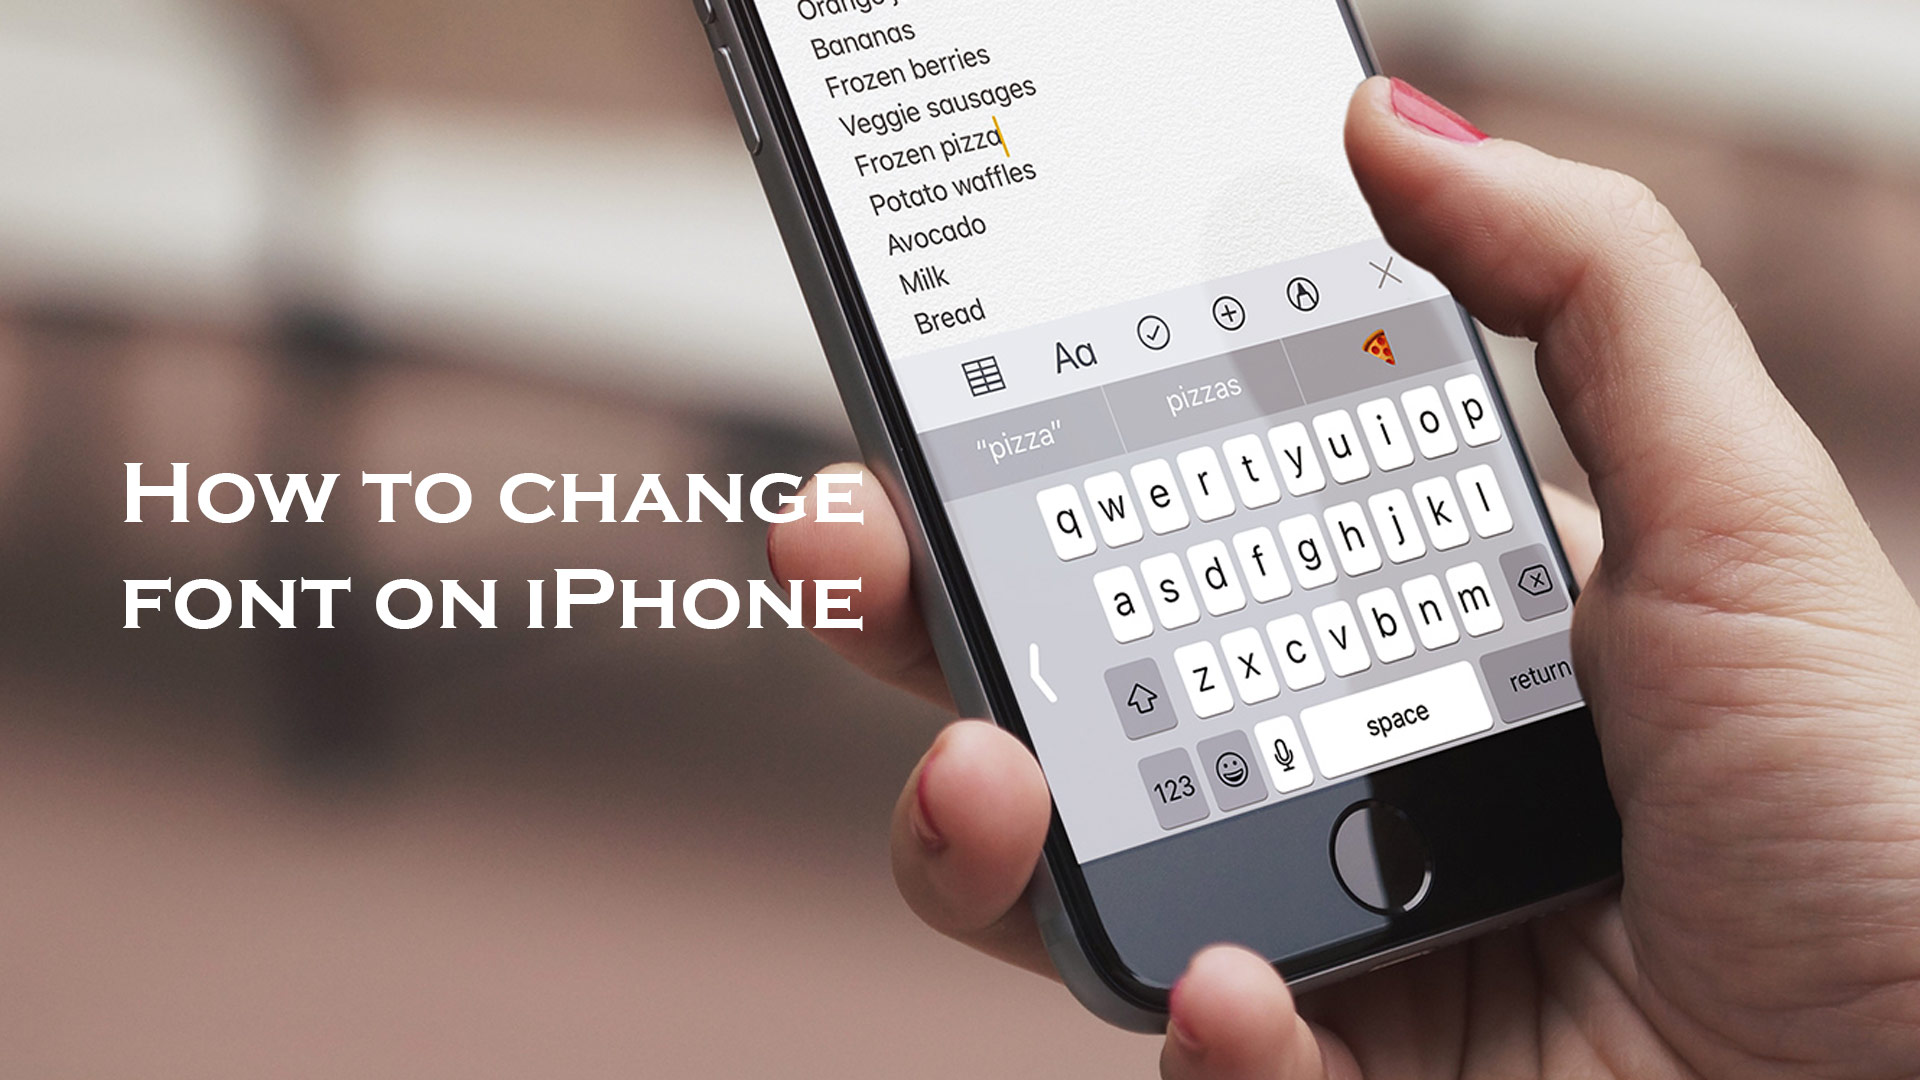 How to change font on iPhone